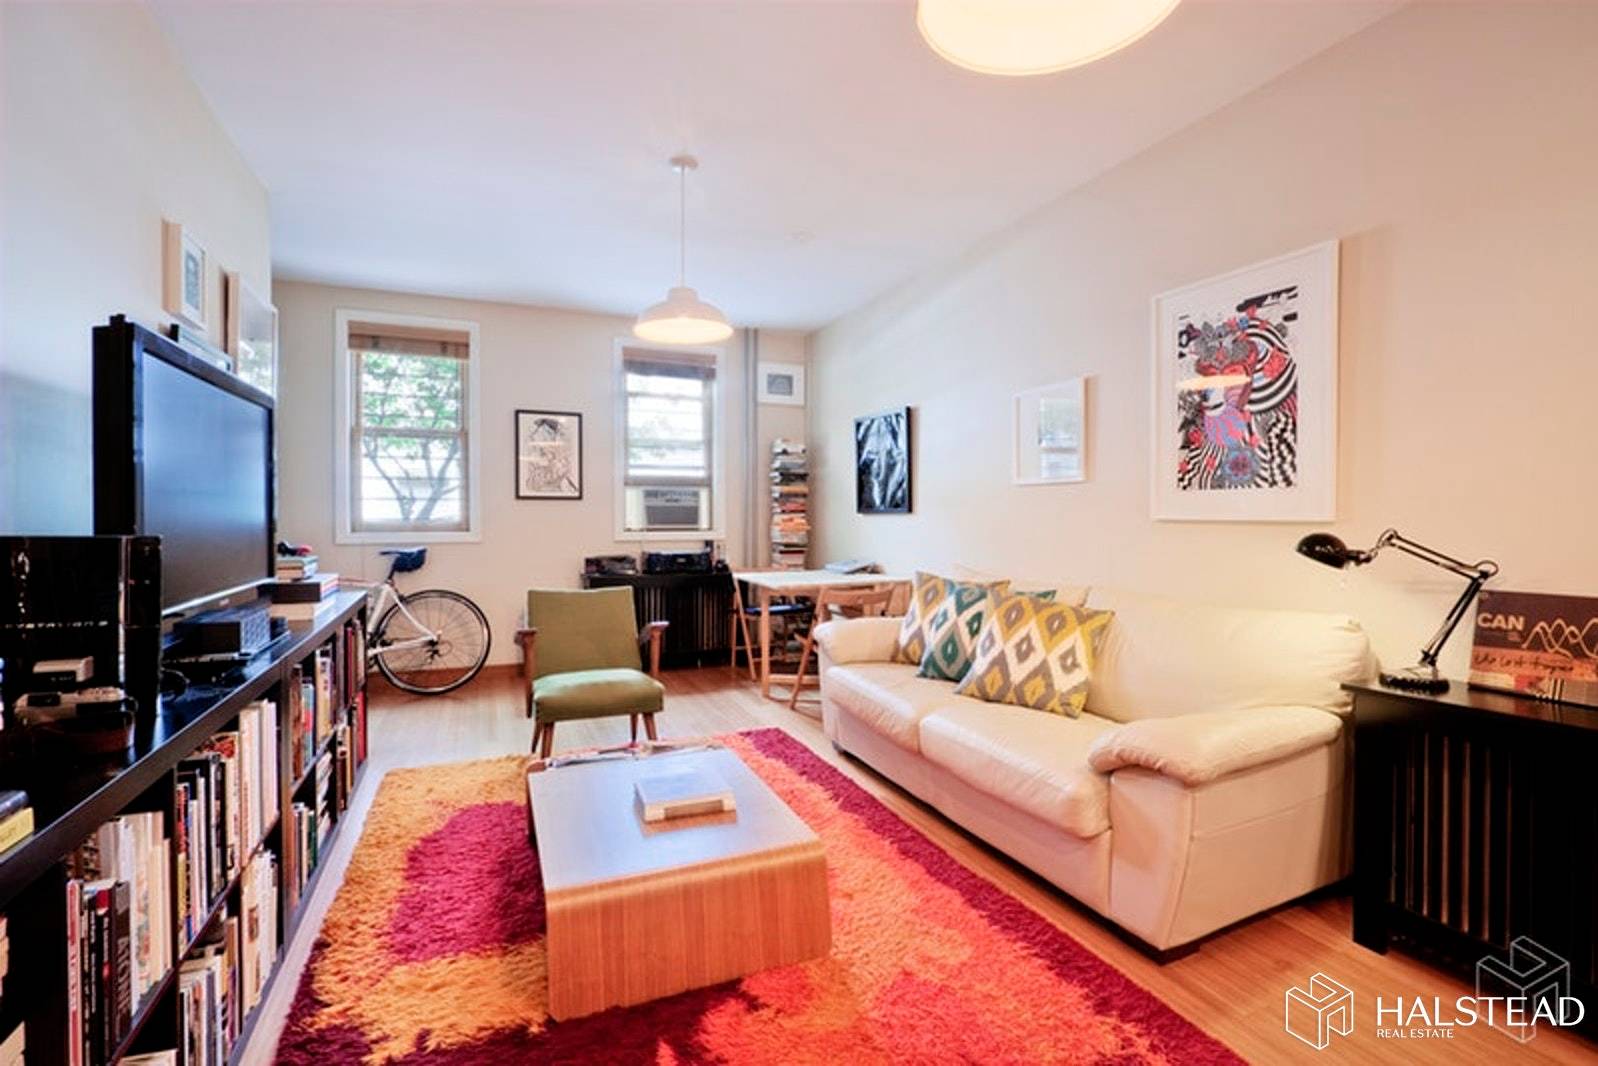 Welcome to this spacious garden level 1 bedroom home located in a prime spot in Gowanus just on the cusp of Carroll Gardens.